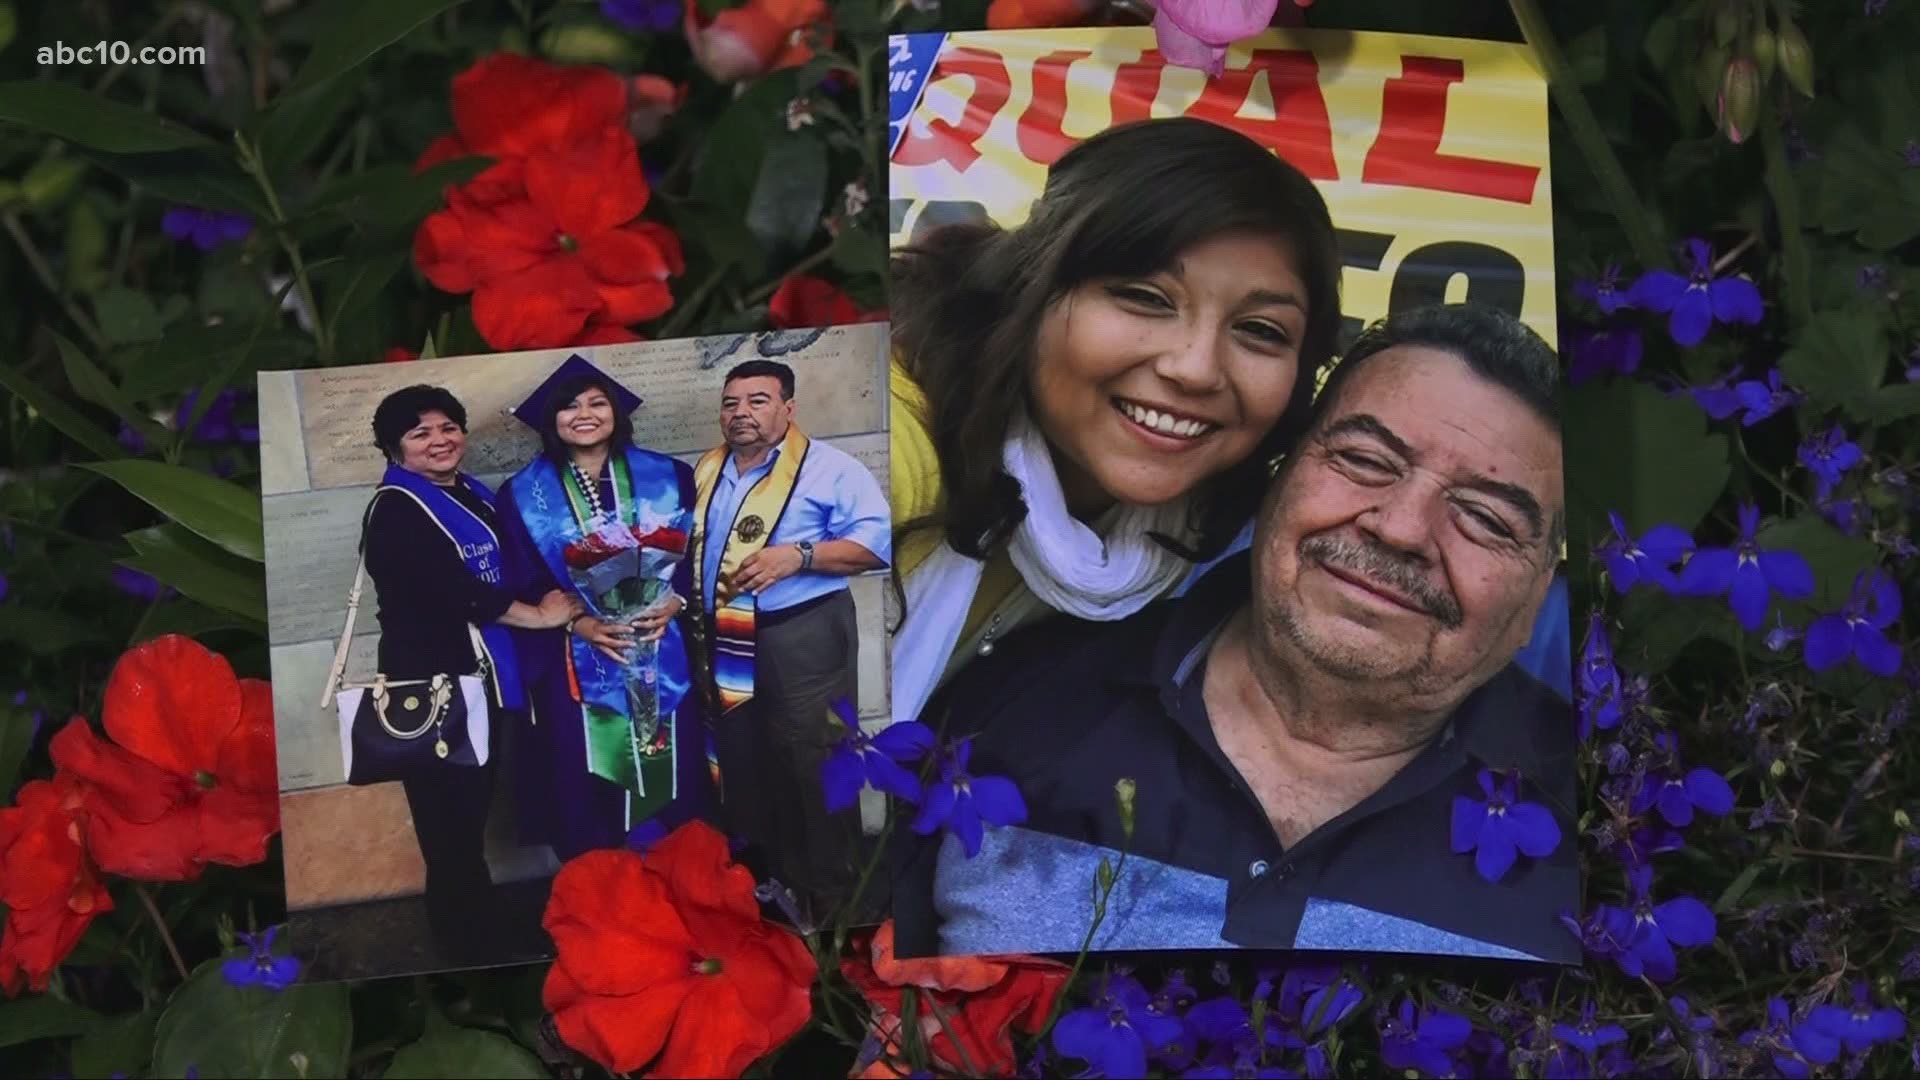 About five days after being admitted, Isauro Acala was put into the ICU and placed on a ventilator. A few hours later, he died. His family never got to say goodbye.